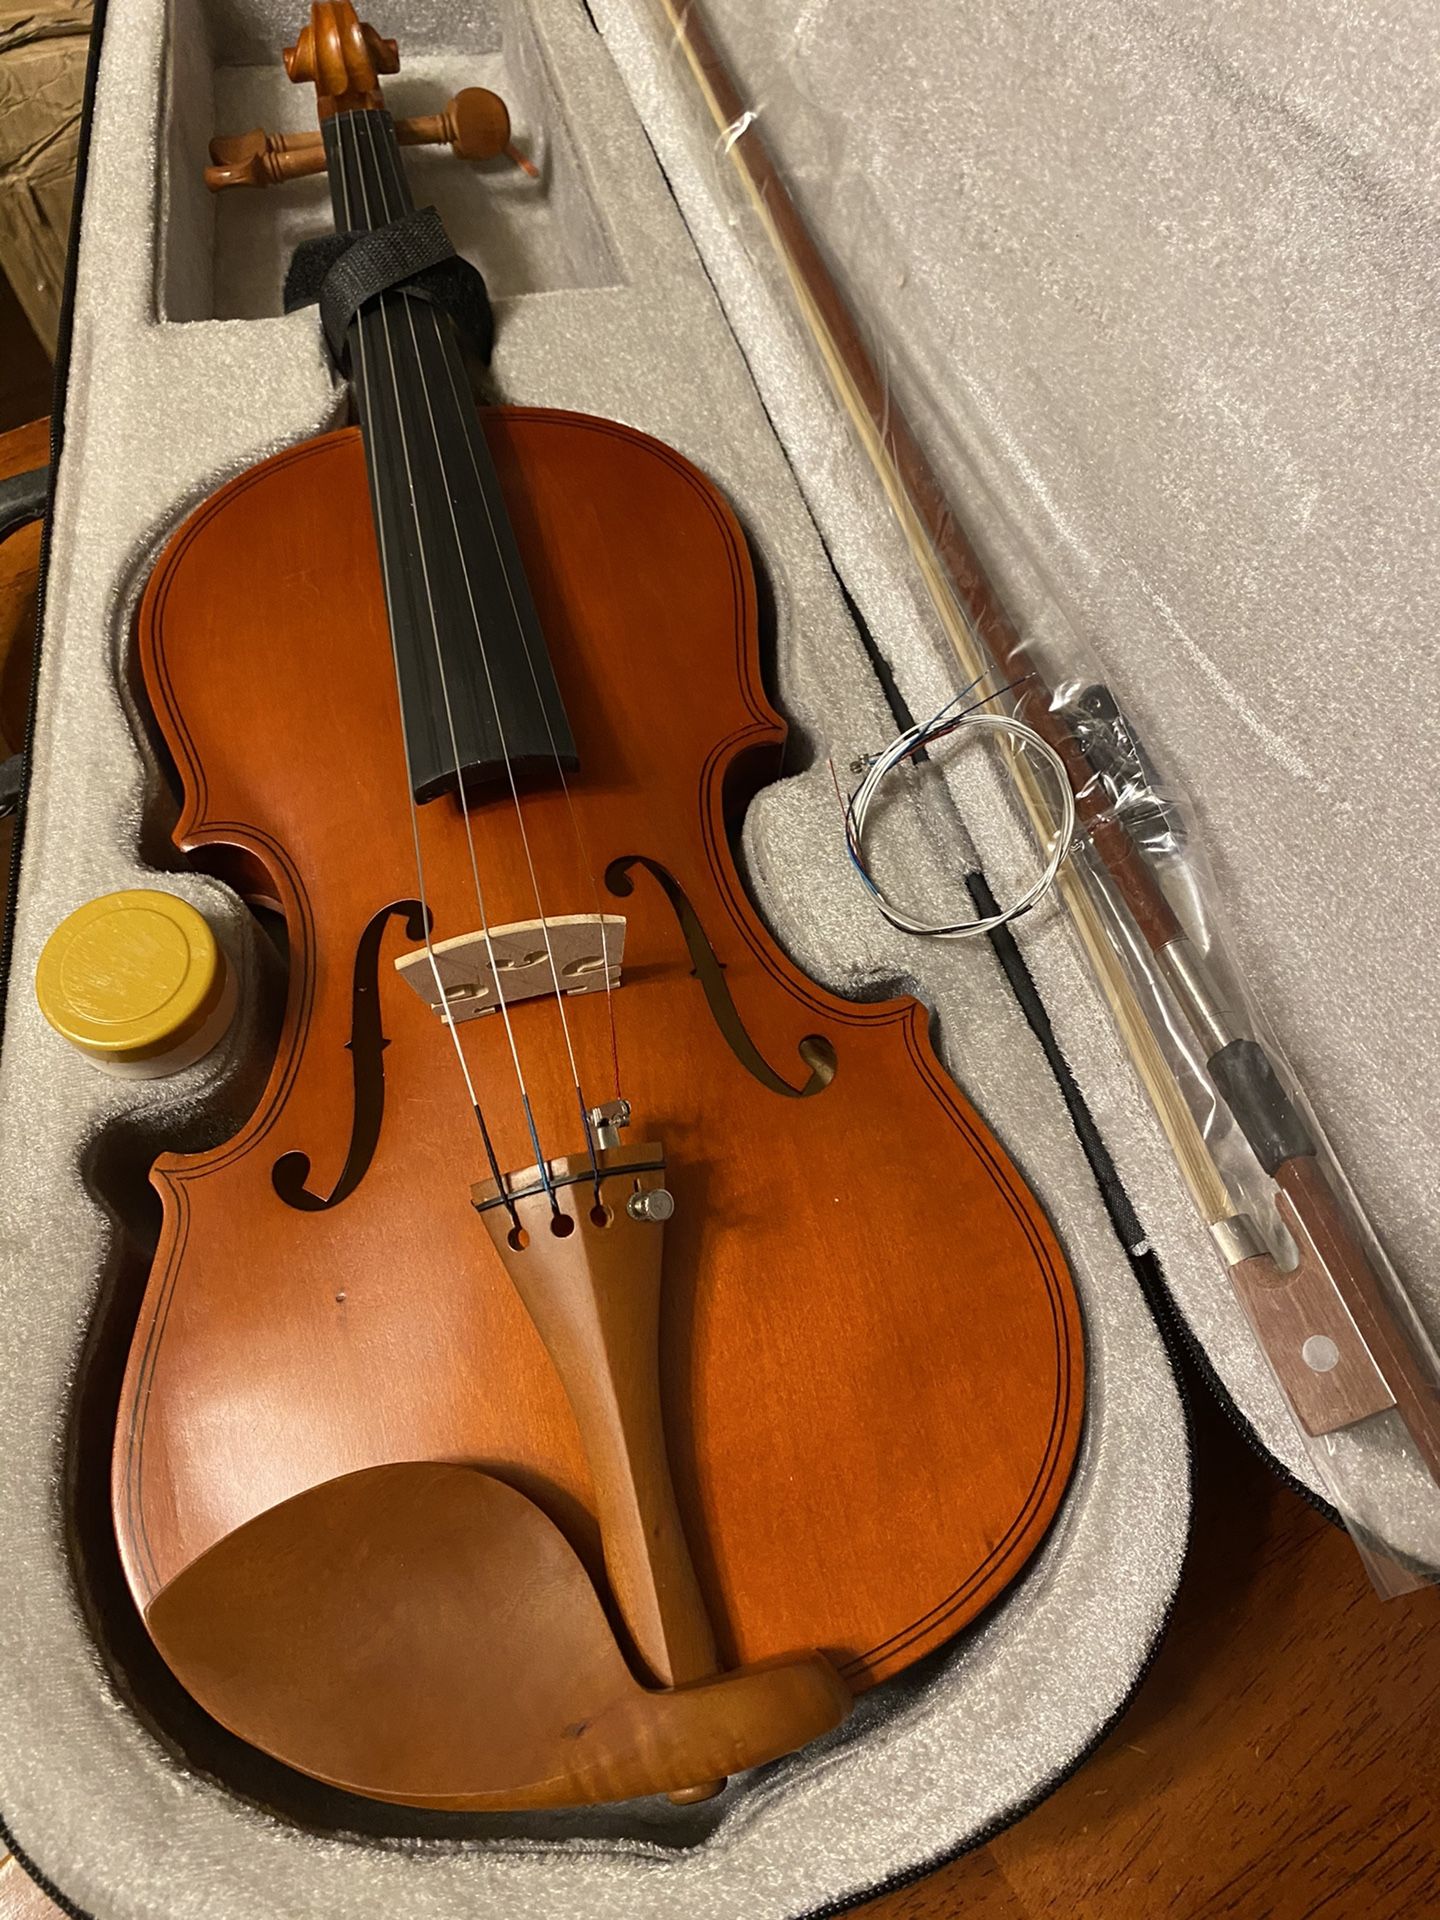 4/4 Full Size Violin with New Bow, Extra Strings, Rosin $80 Firm